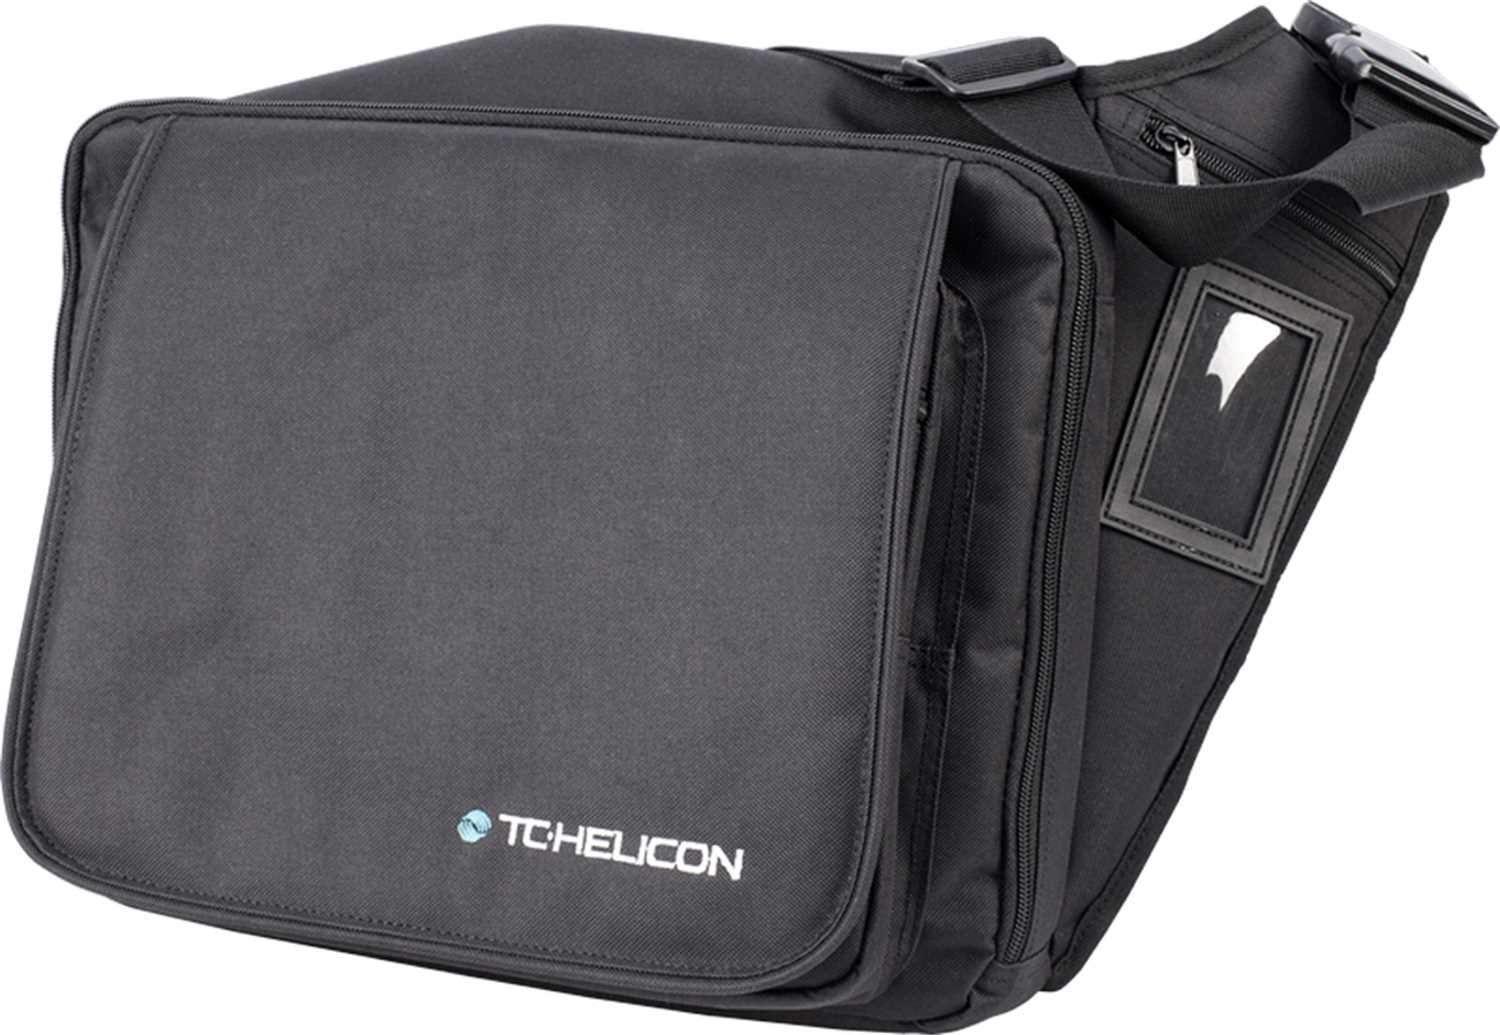 TC Helicon Gig Bag for VoiceLive 2 or 3